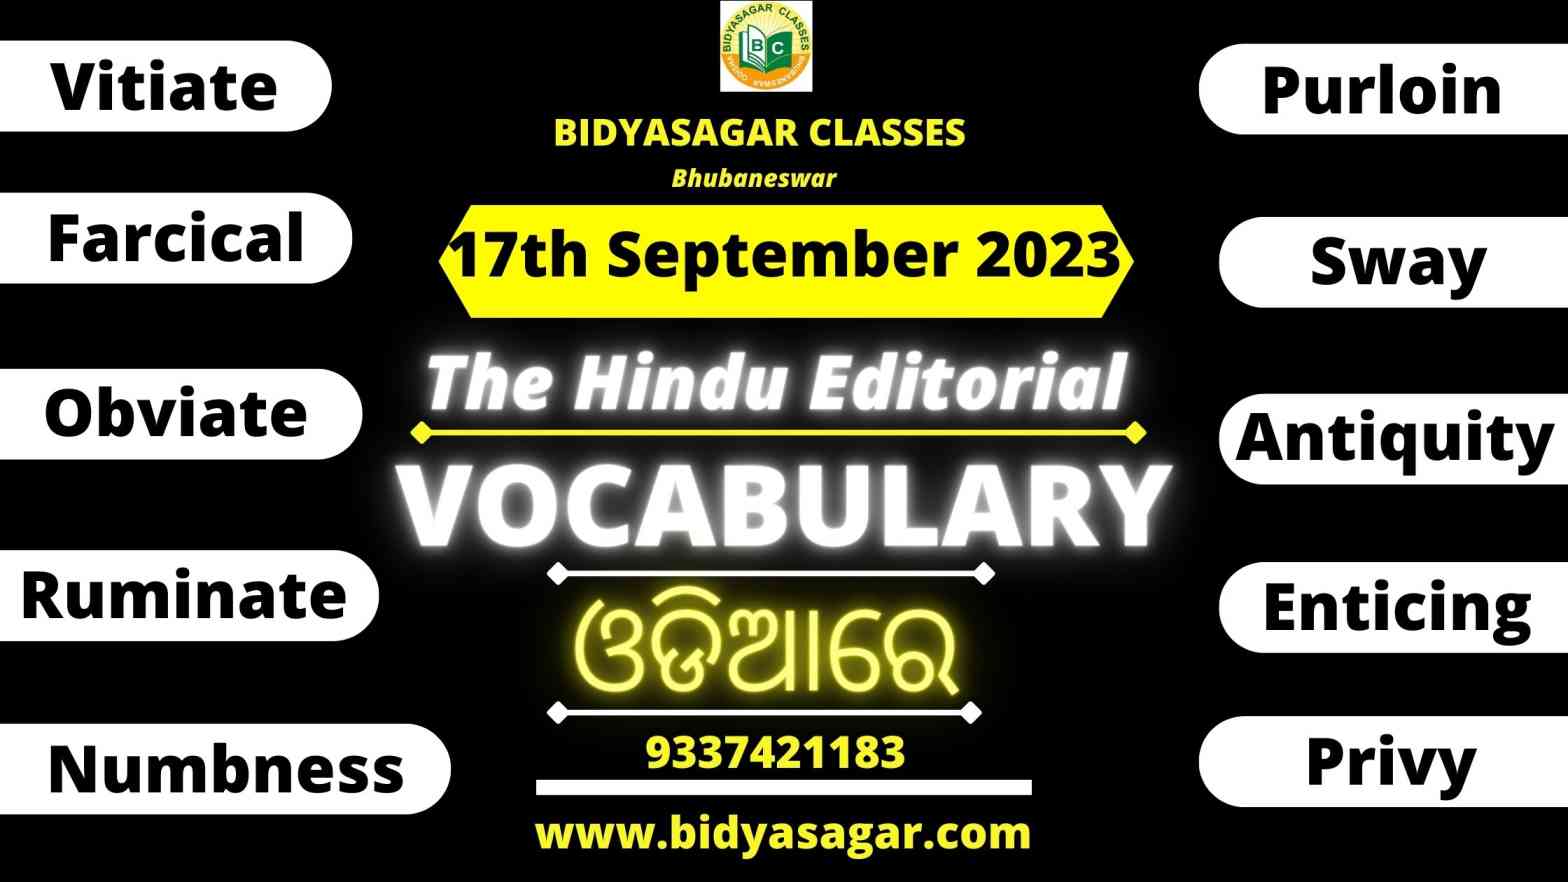 The Hindu Editorial Vocabulary of 17th September 2023